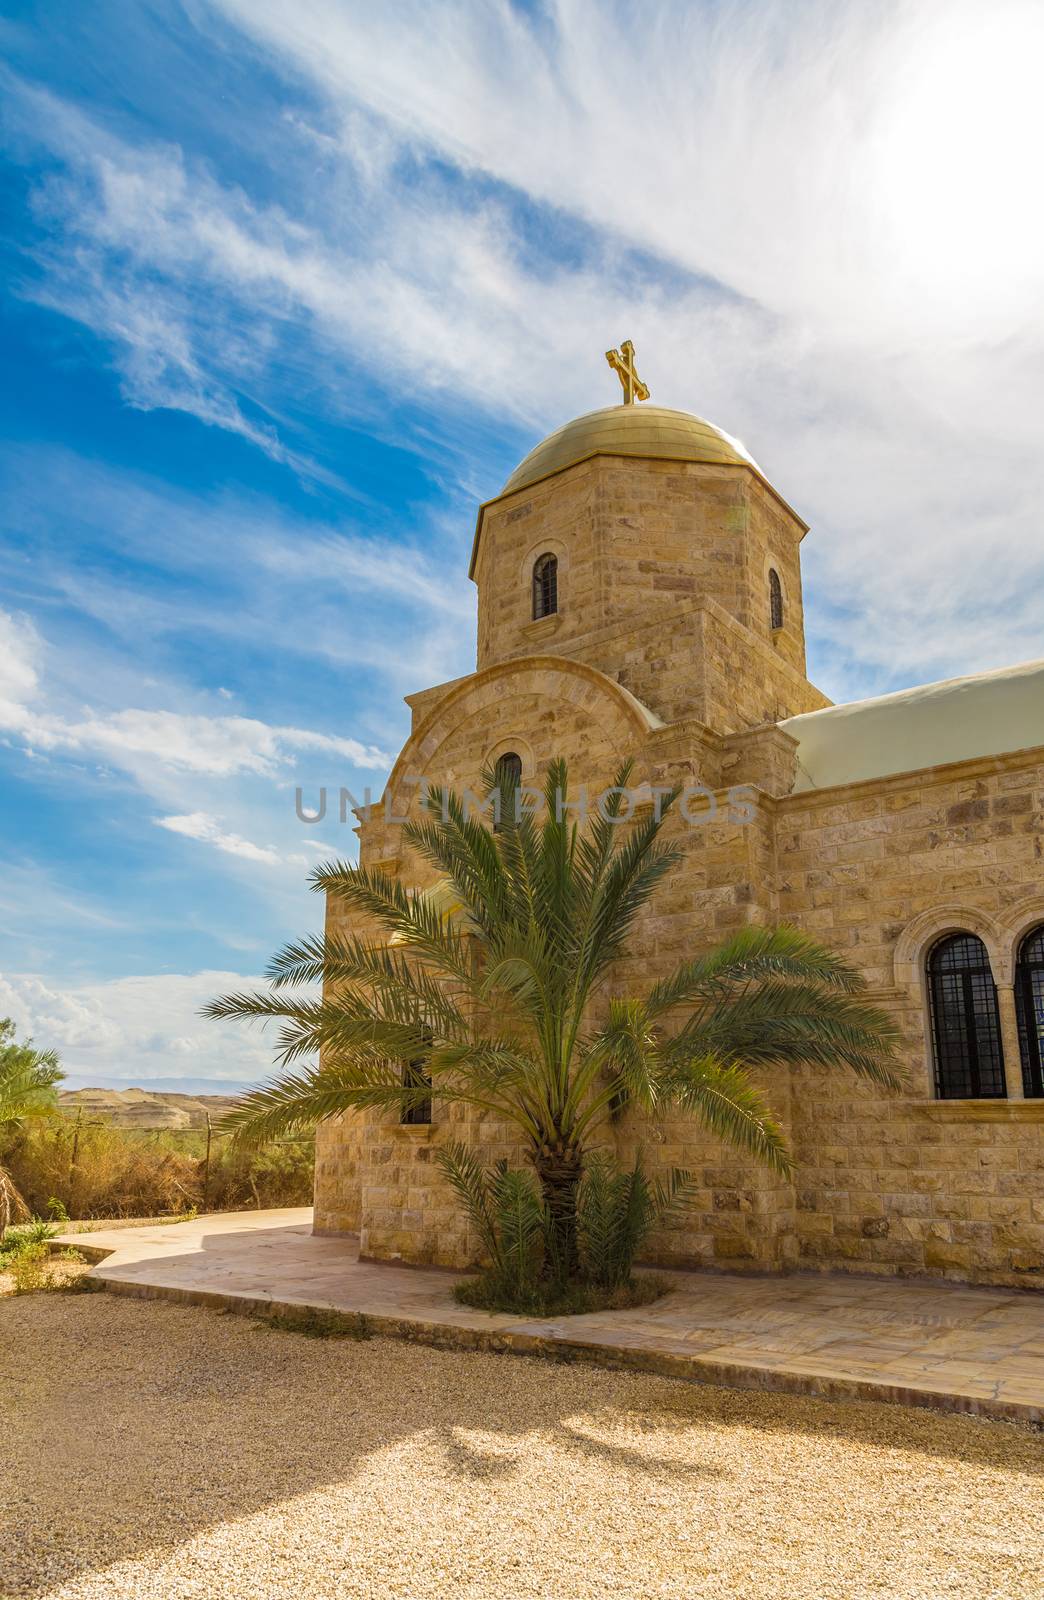 Church of St. John the Baptist, Baptised Site of Jesus Christ, Jordan. Photographed close-up on a bright sunny day.